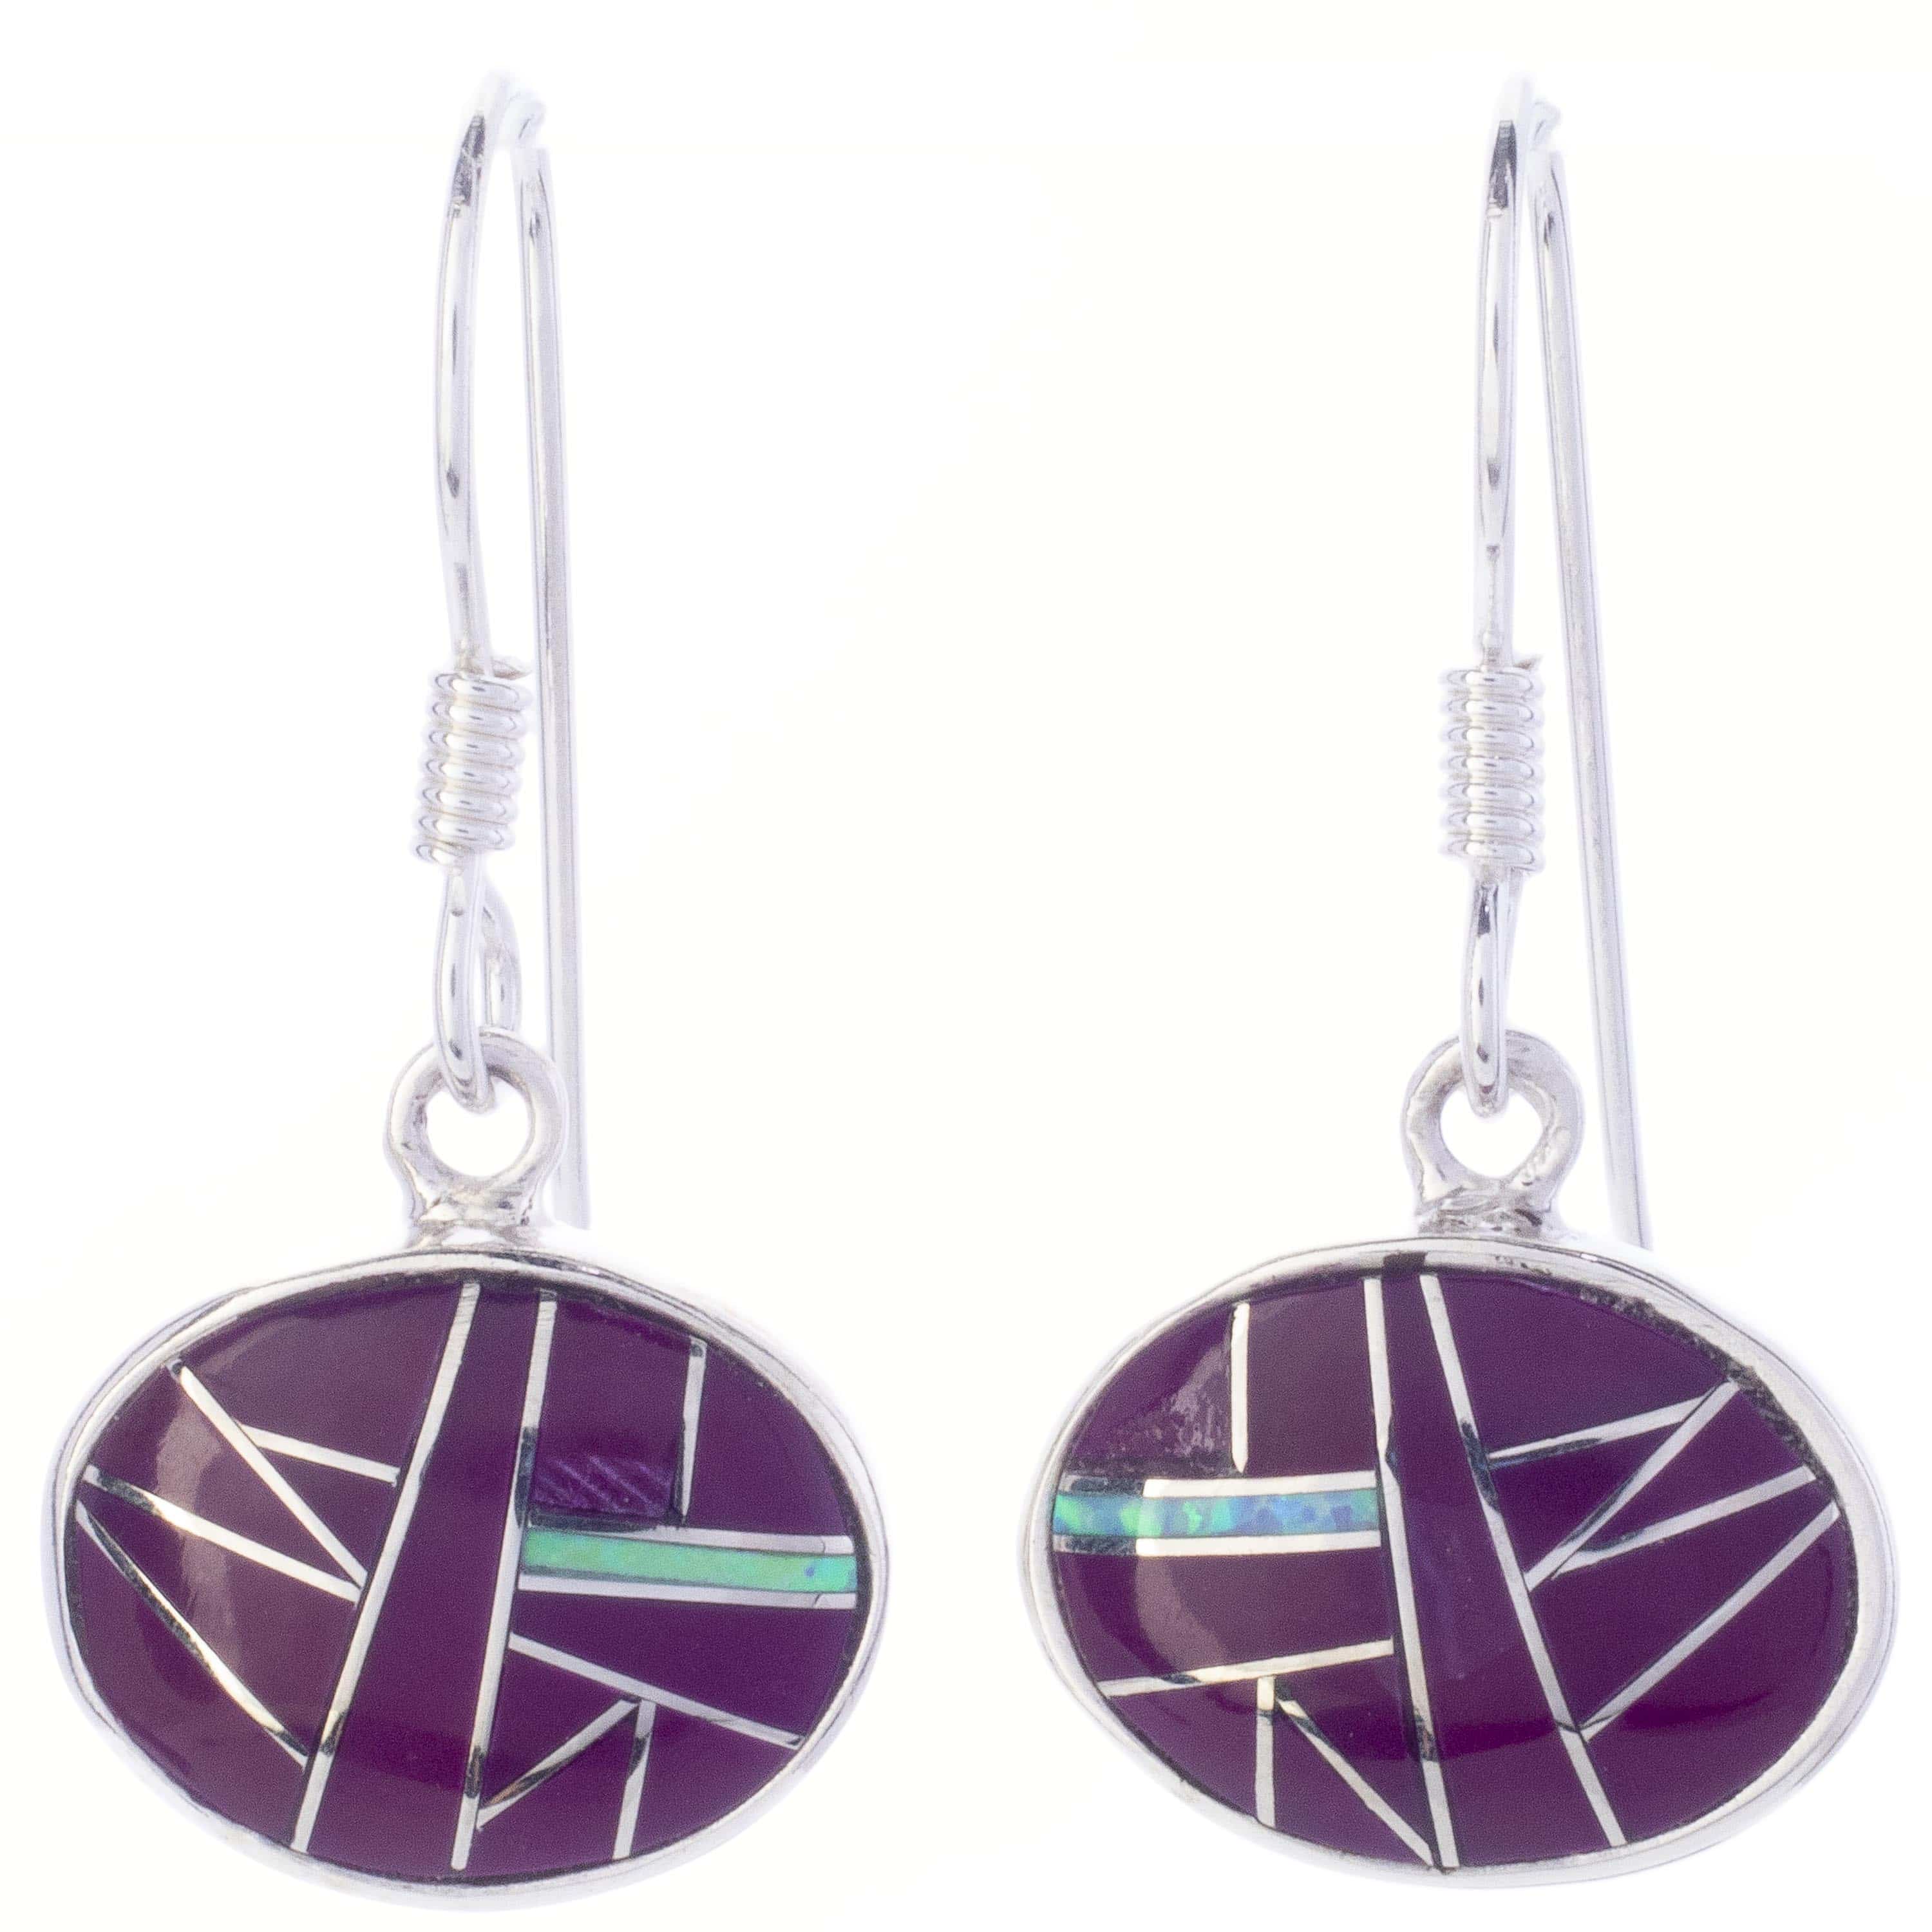 KALIFANO Southwest Silver Jewelry Sugilite Oval Dangle Sterling Silver Earrings with French Hook USA Handmade with Opal Accent NME.2015.SG